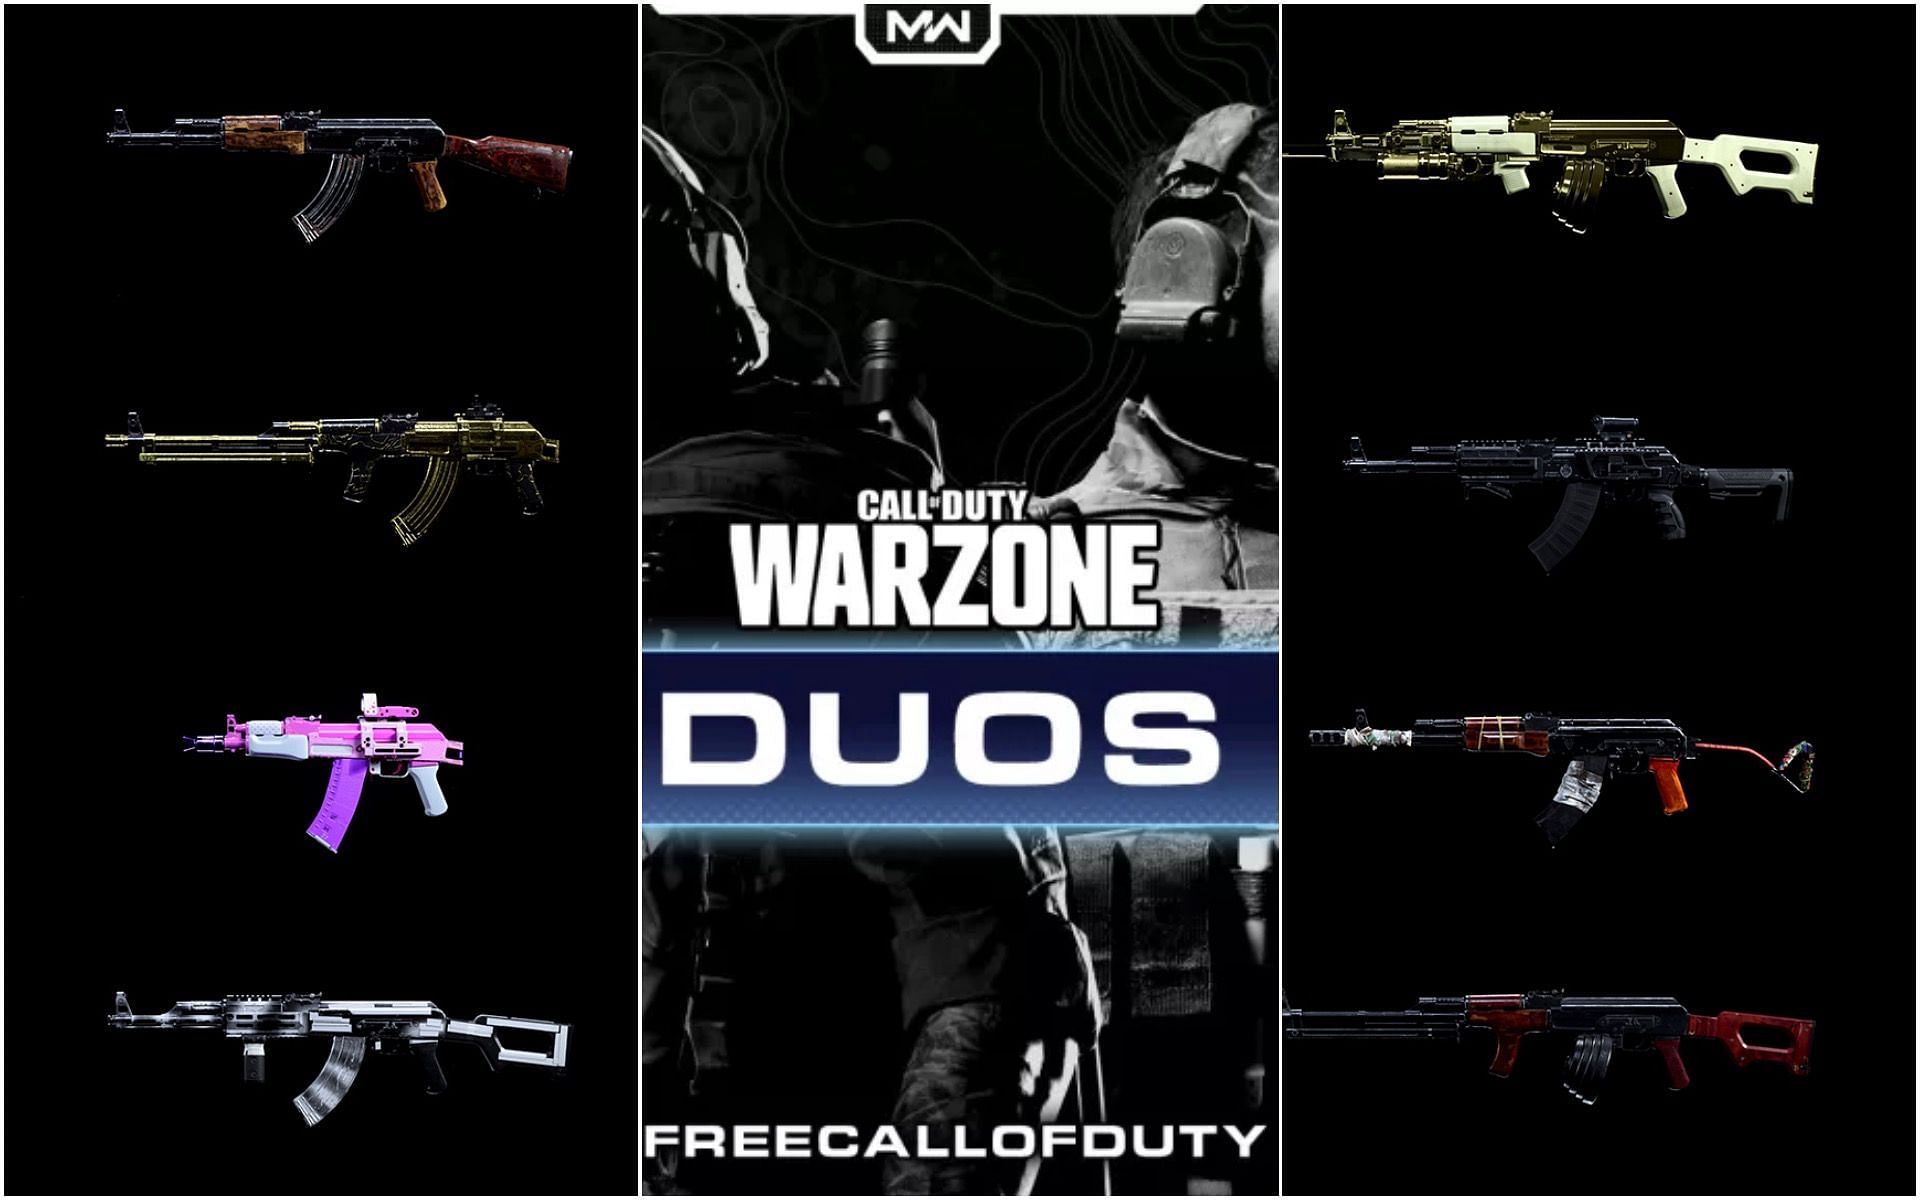 Best weapons for Call of Duty duos (IImages via Activision)